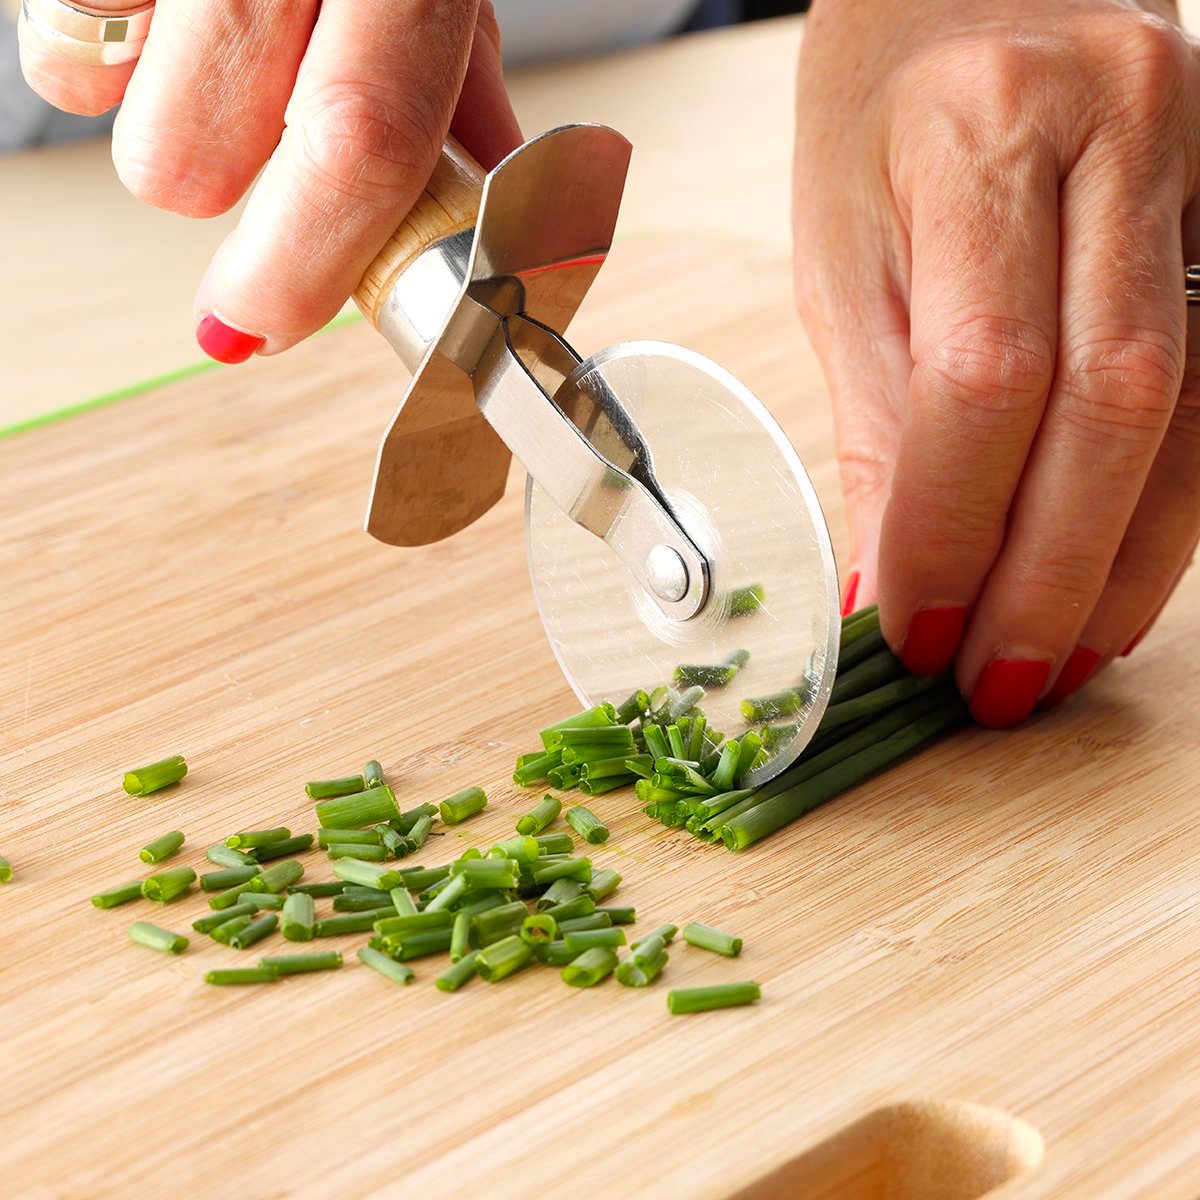 10 Genius Uses for a Pizza Cutter